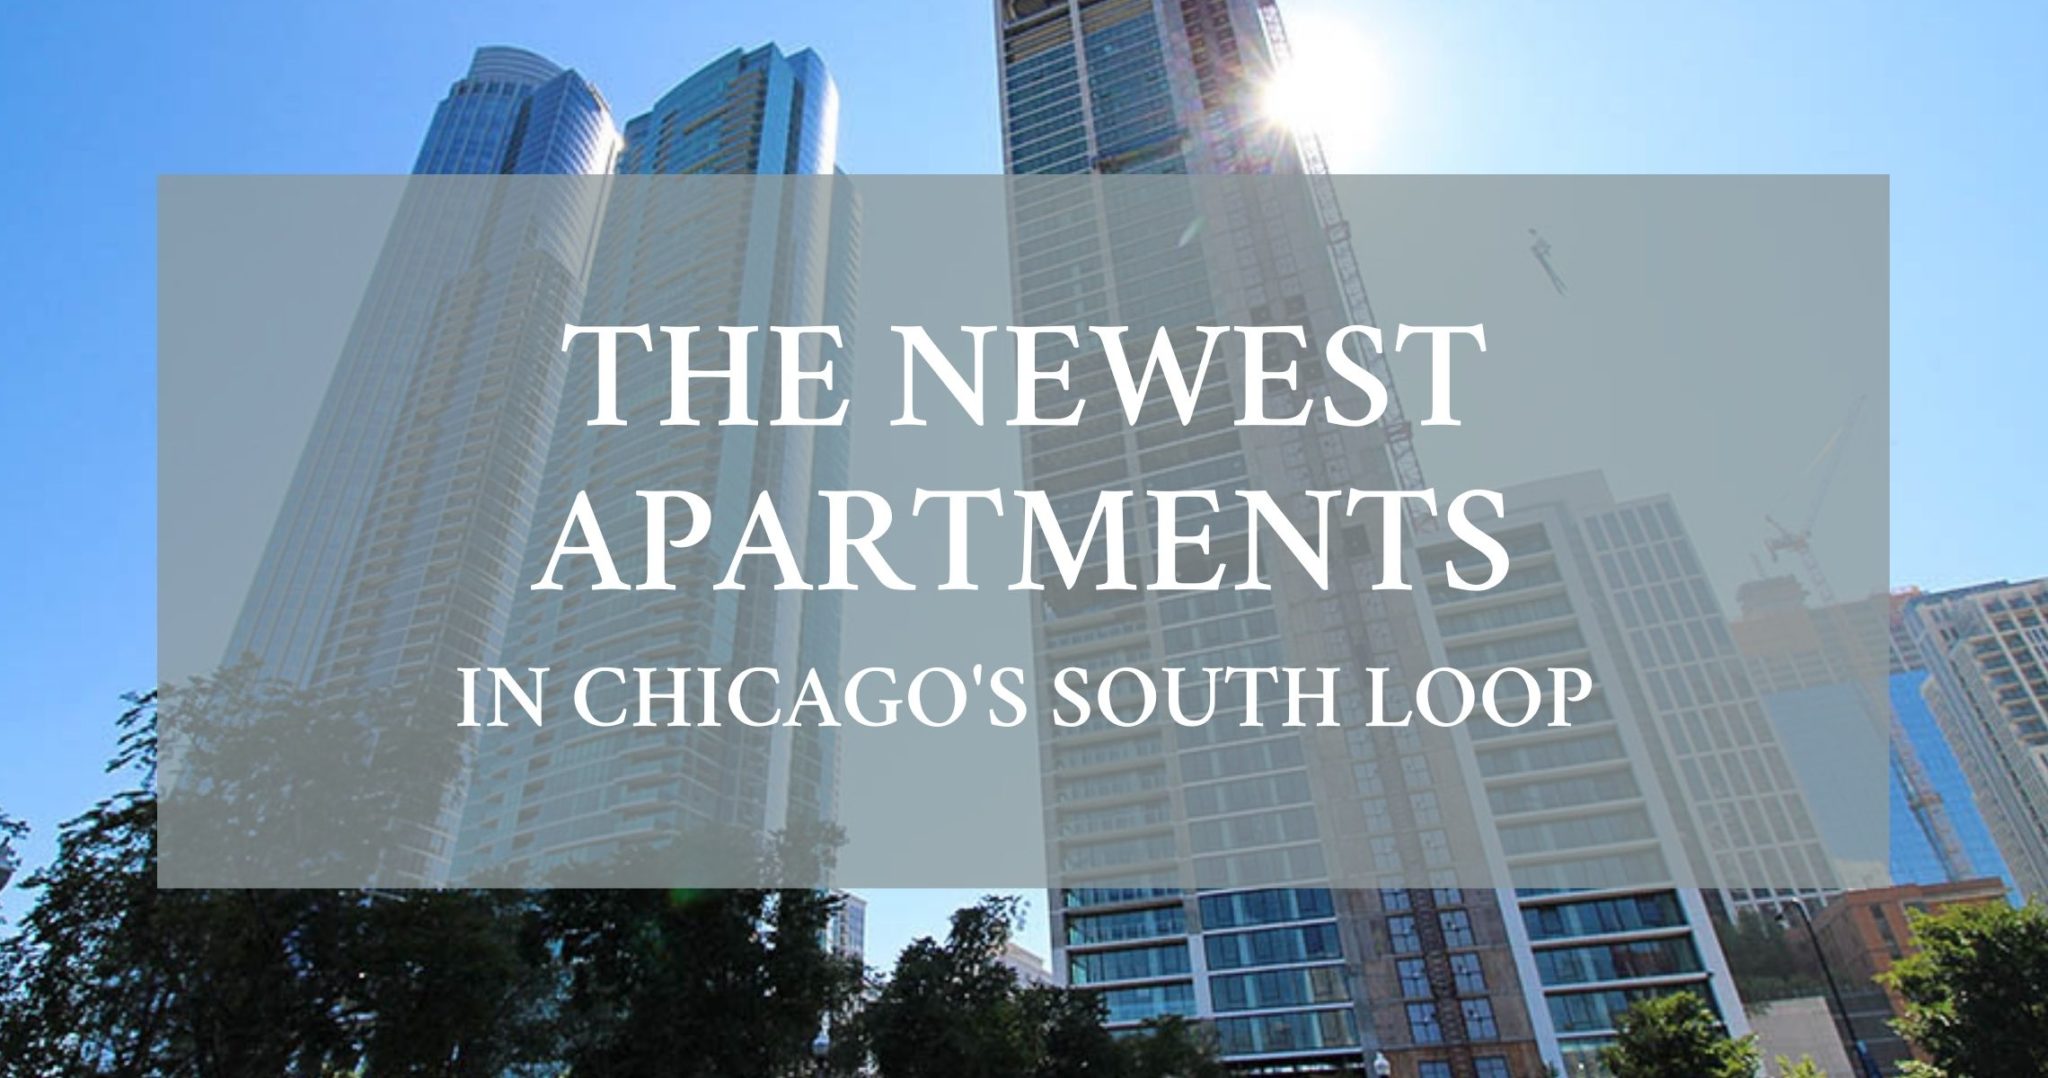 the newest apartments in Chicago's South Loop neighborhood